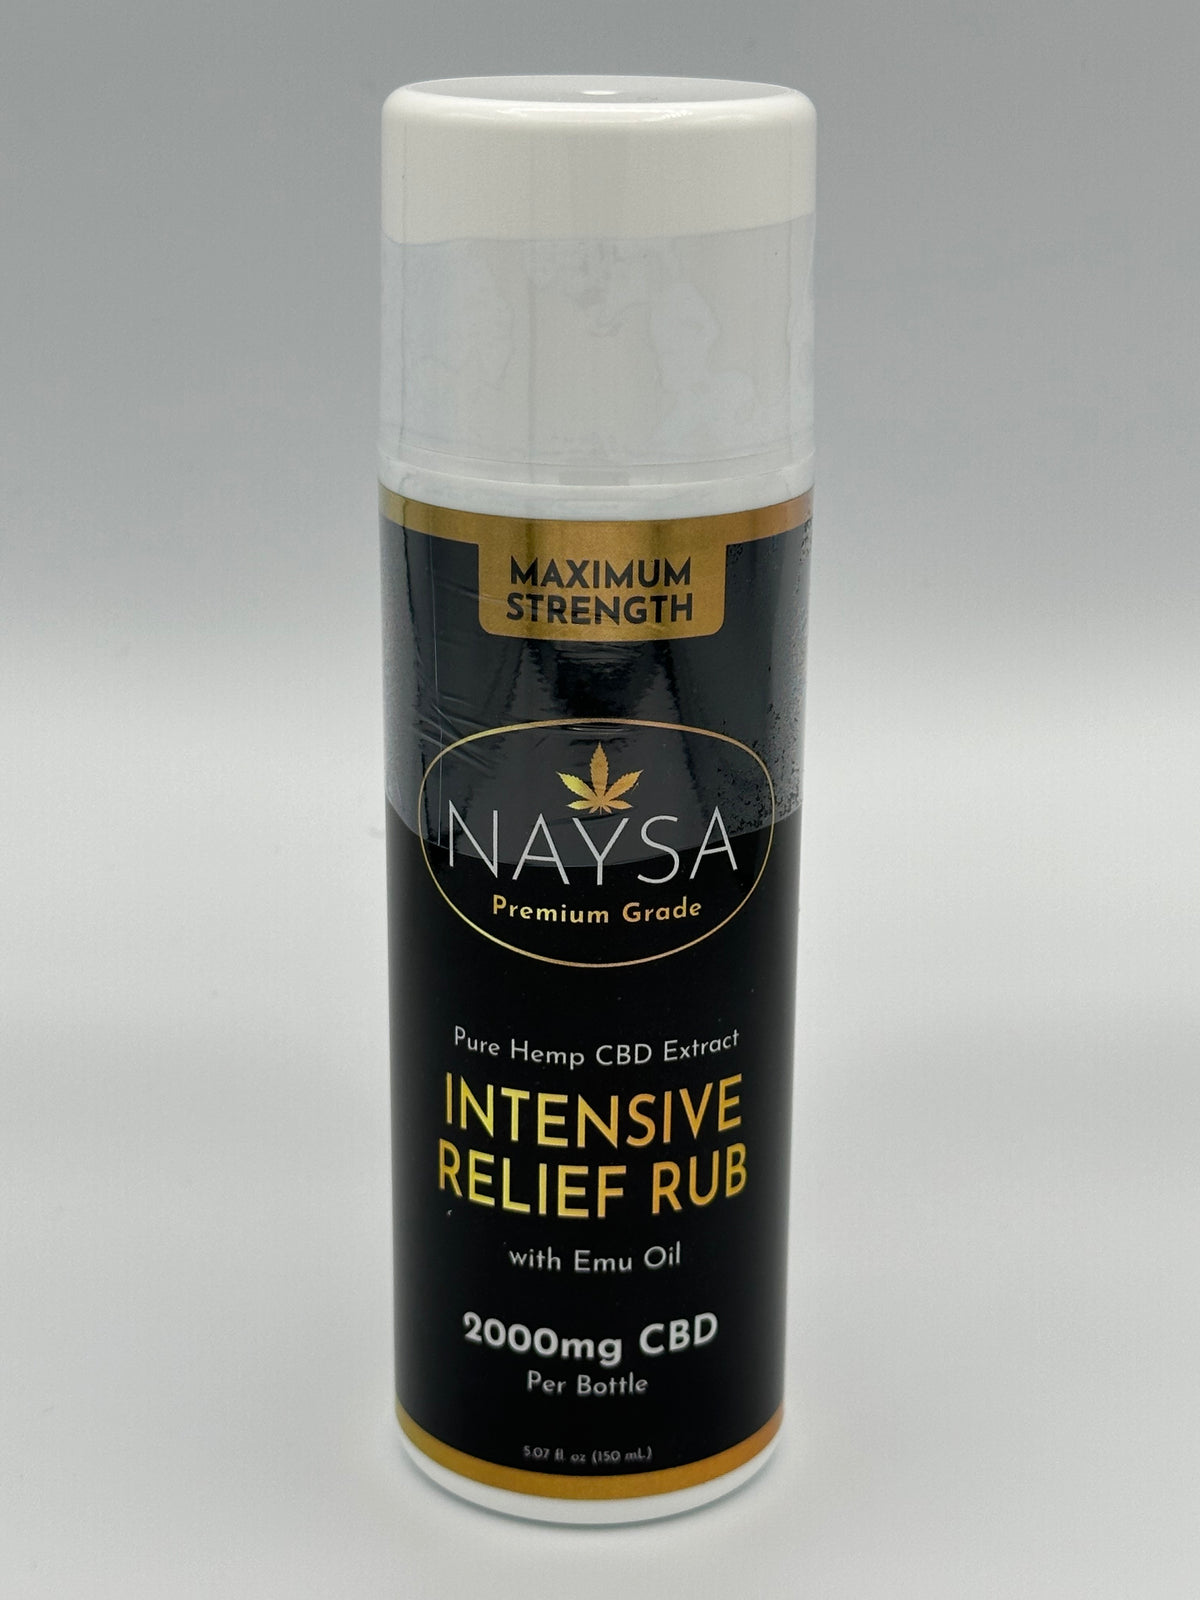 Intensive Relief Rub with Emu Oil and 2,000mg CBD – NAYSA